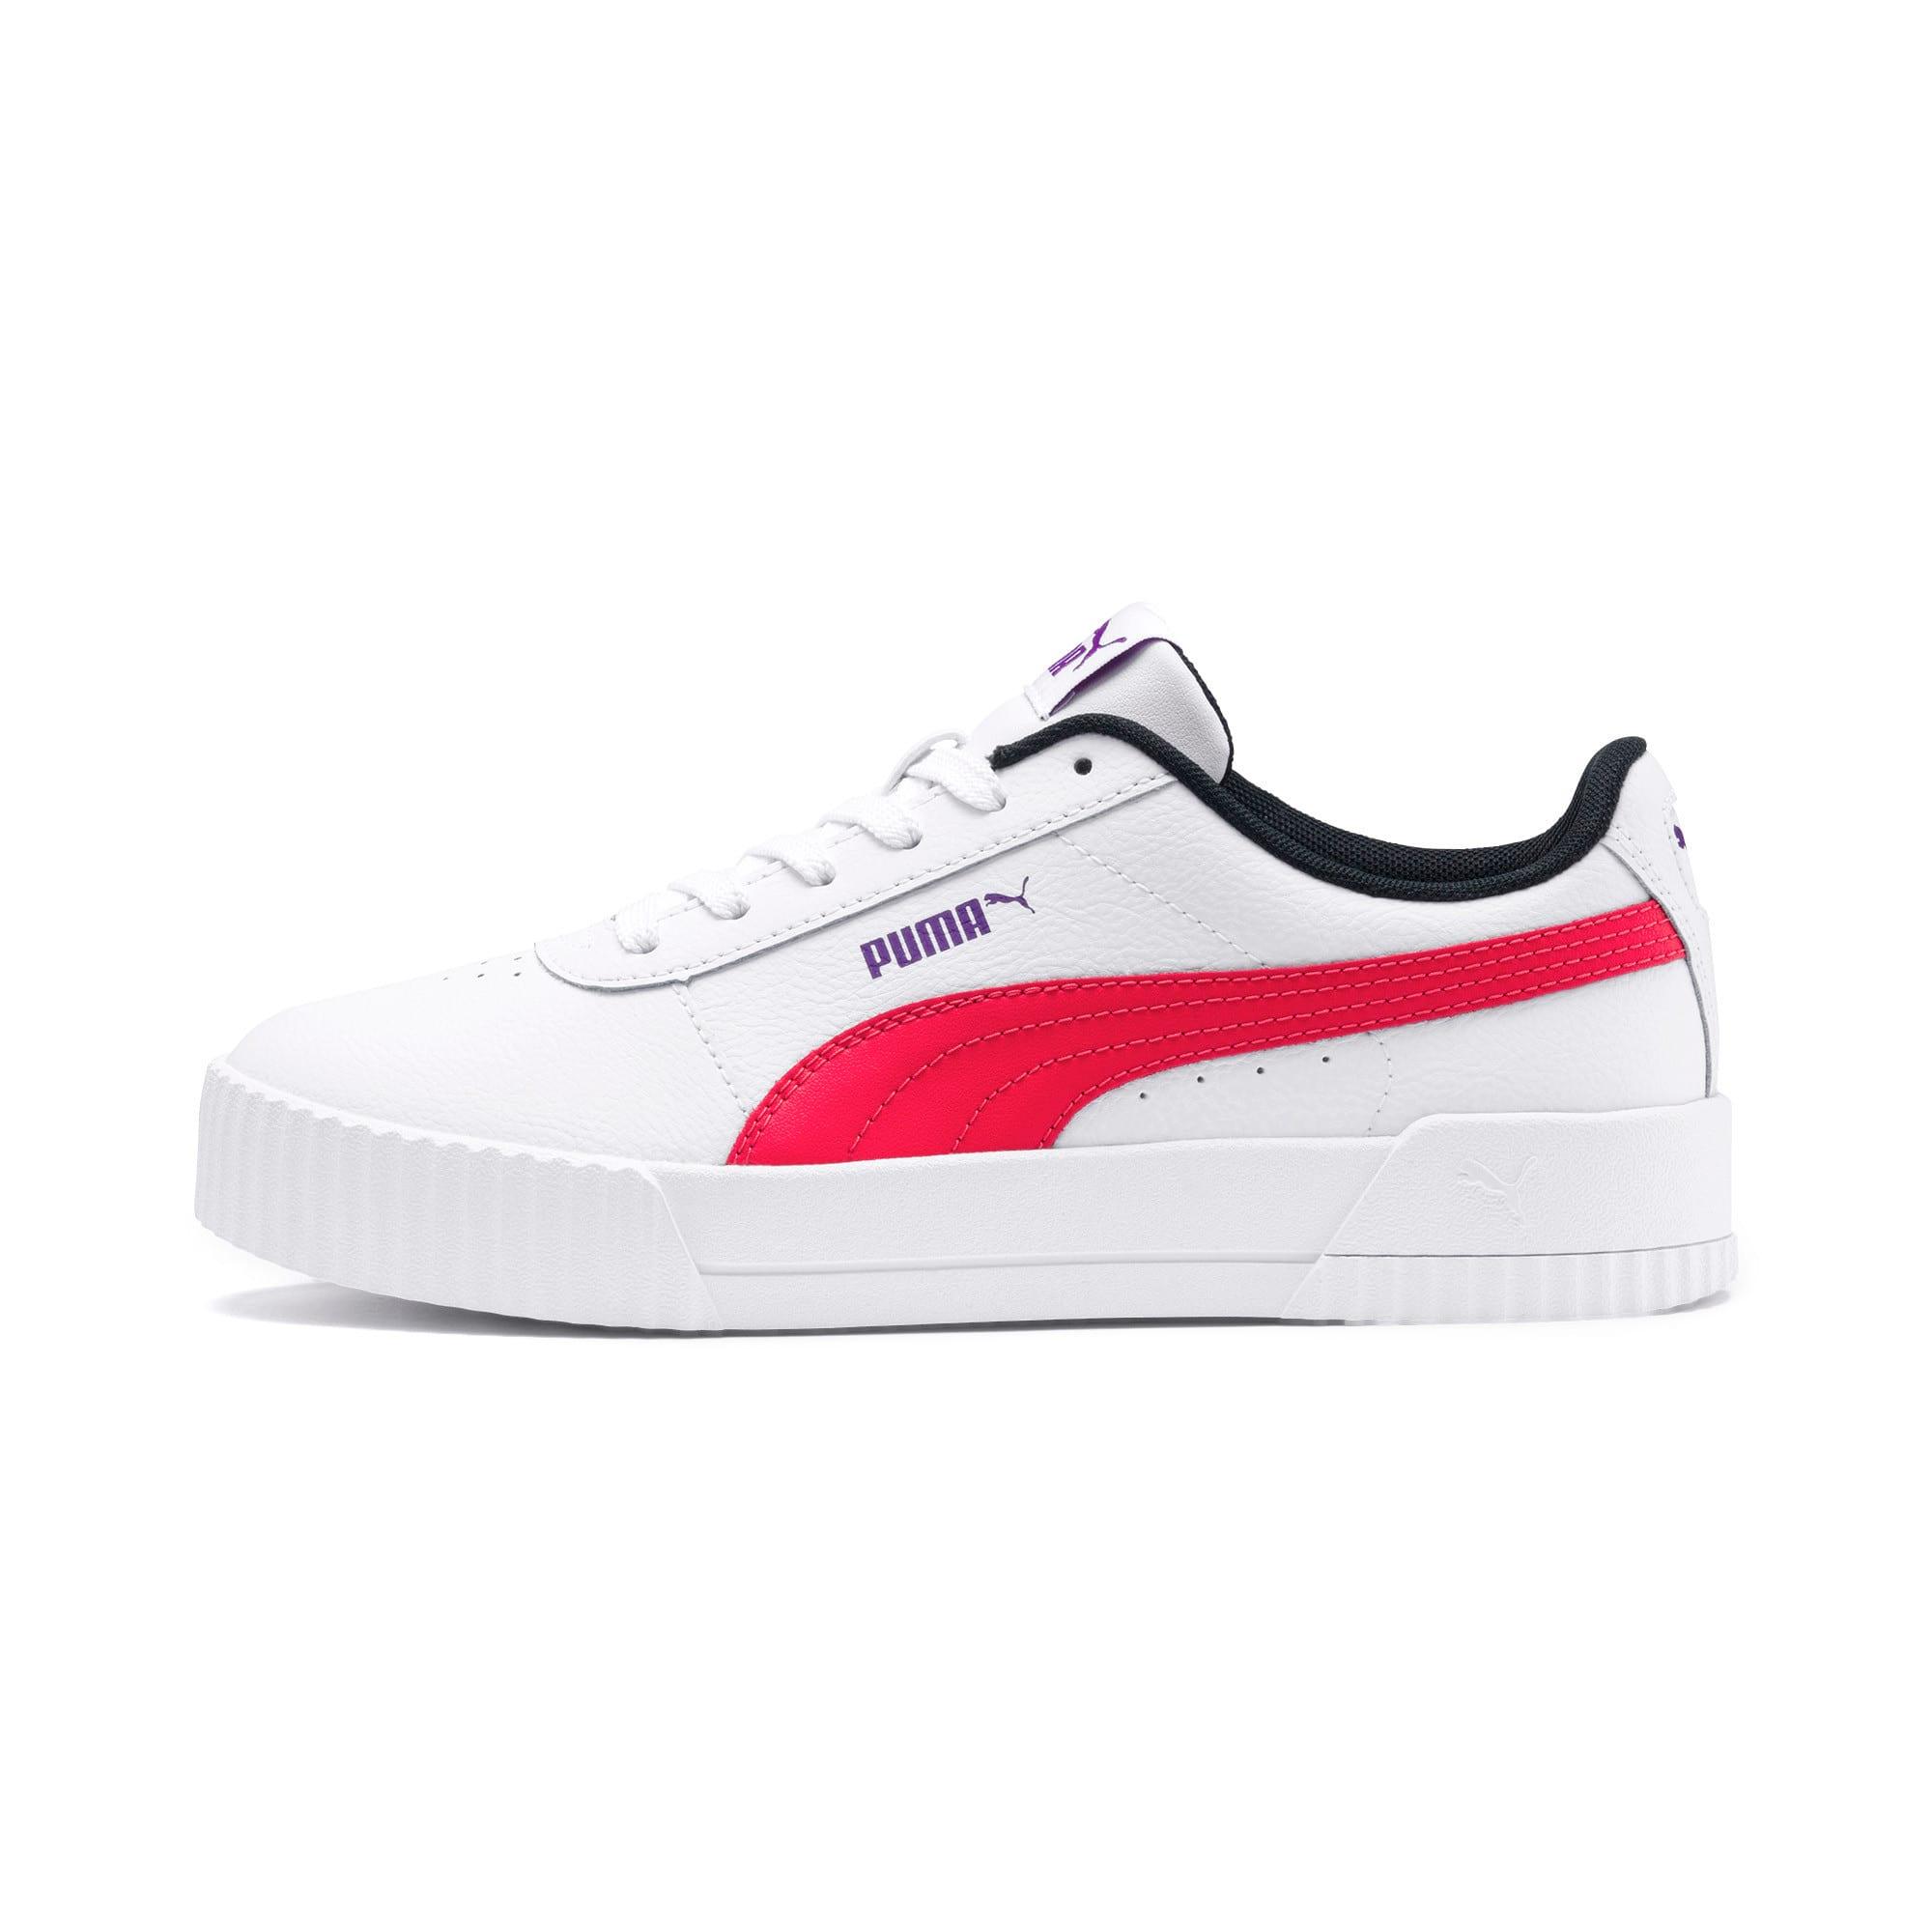 PUMA Carina Leather Women's Sneakers in White - Save 25% - Lyst